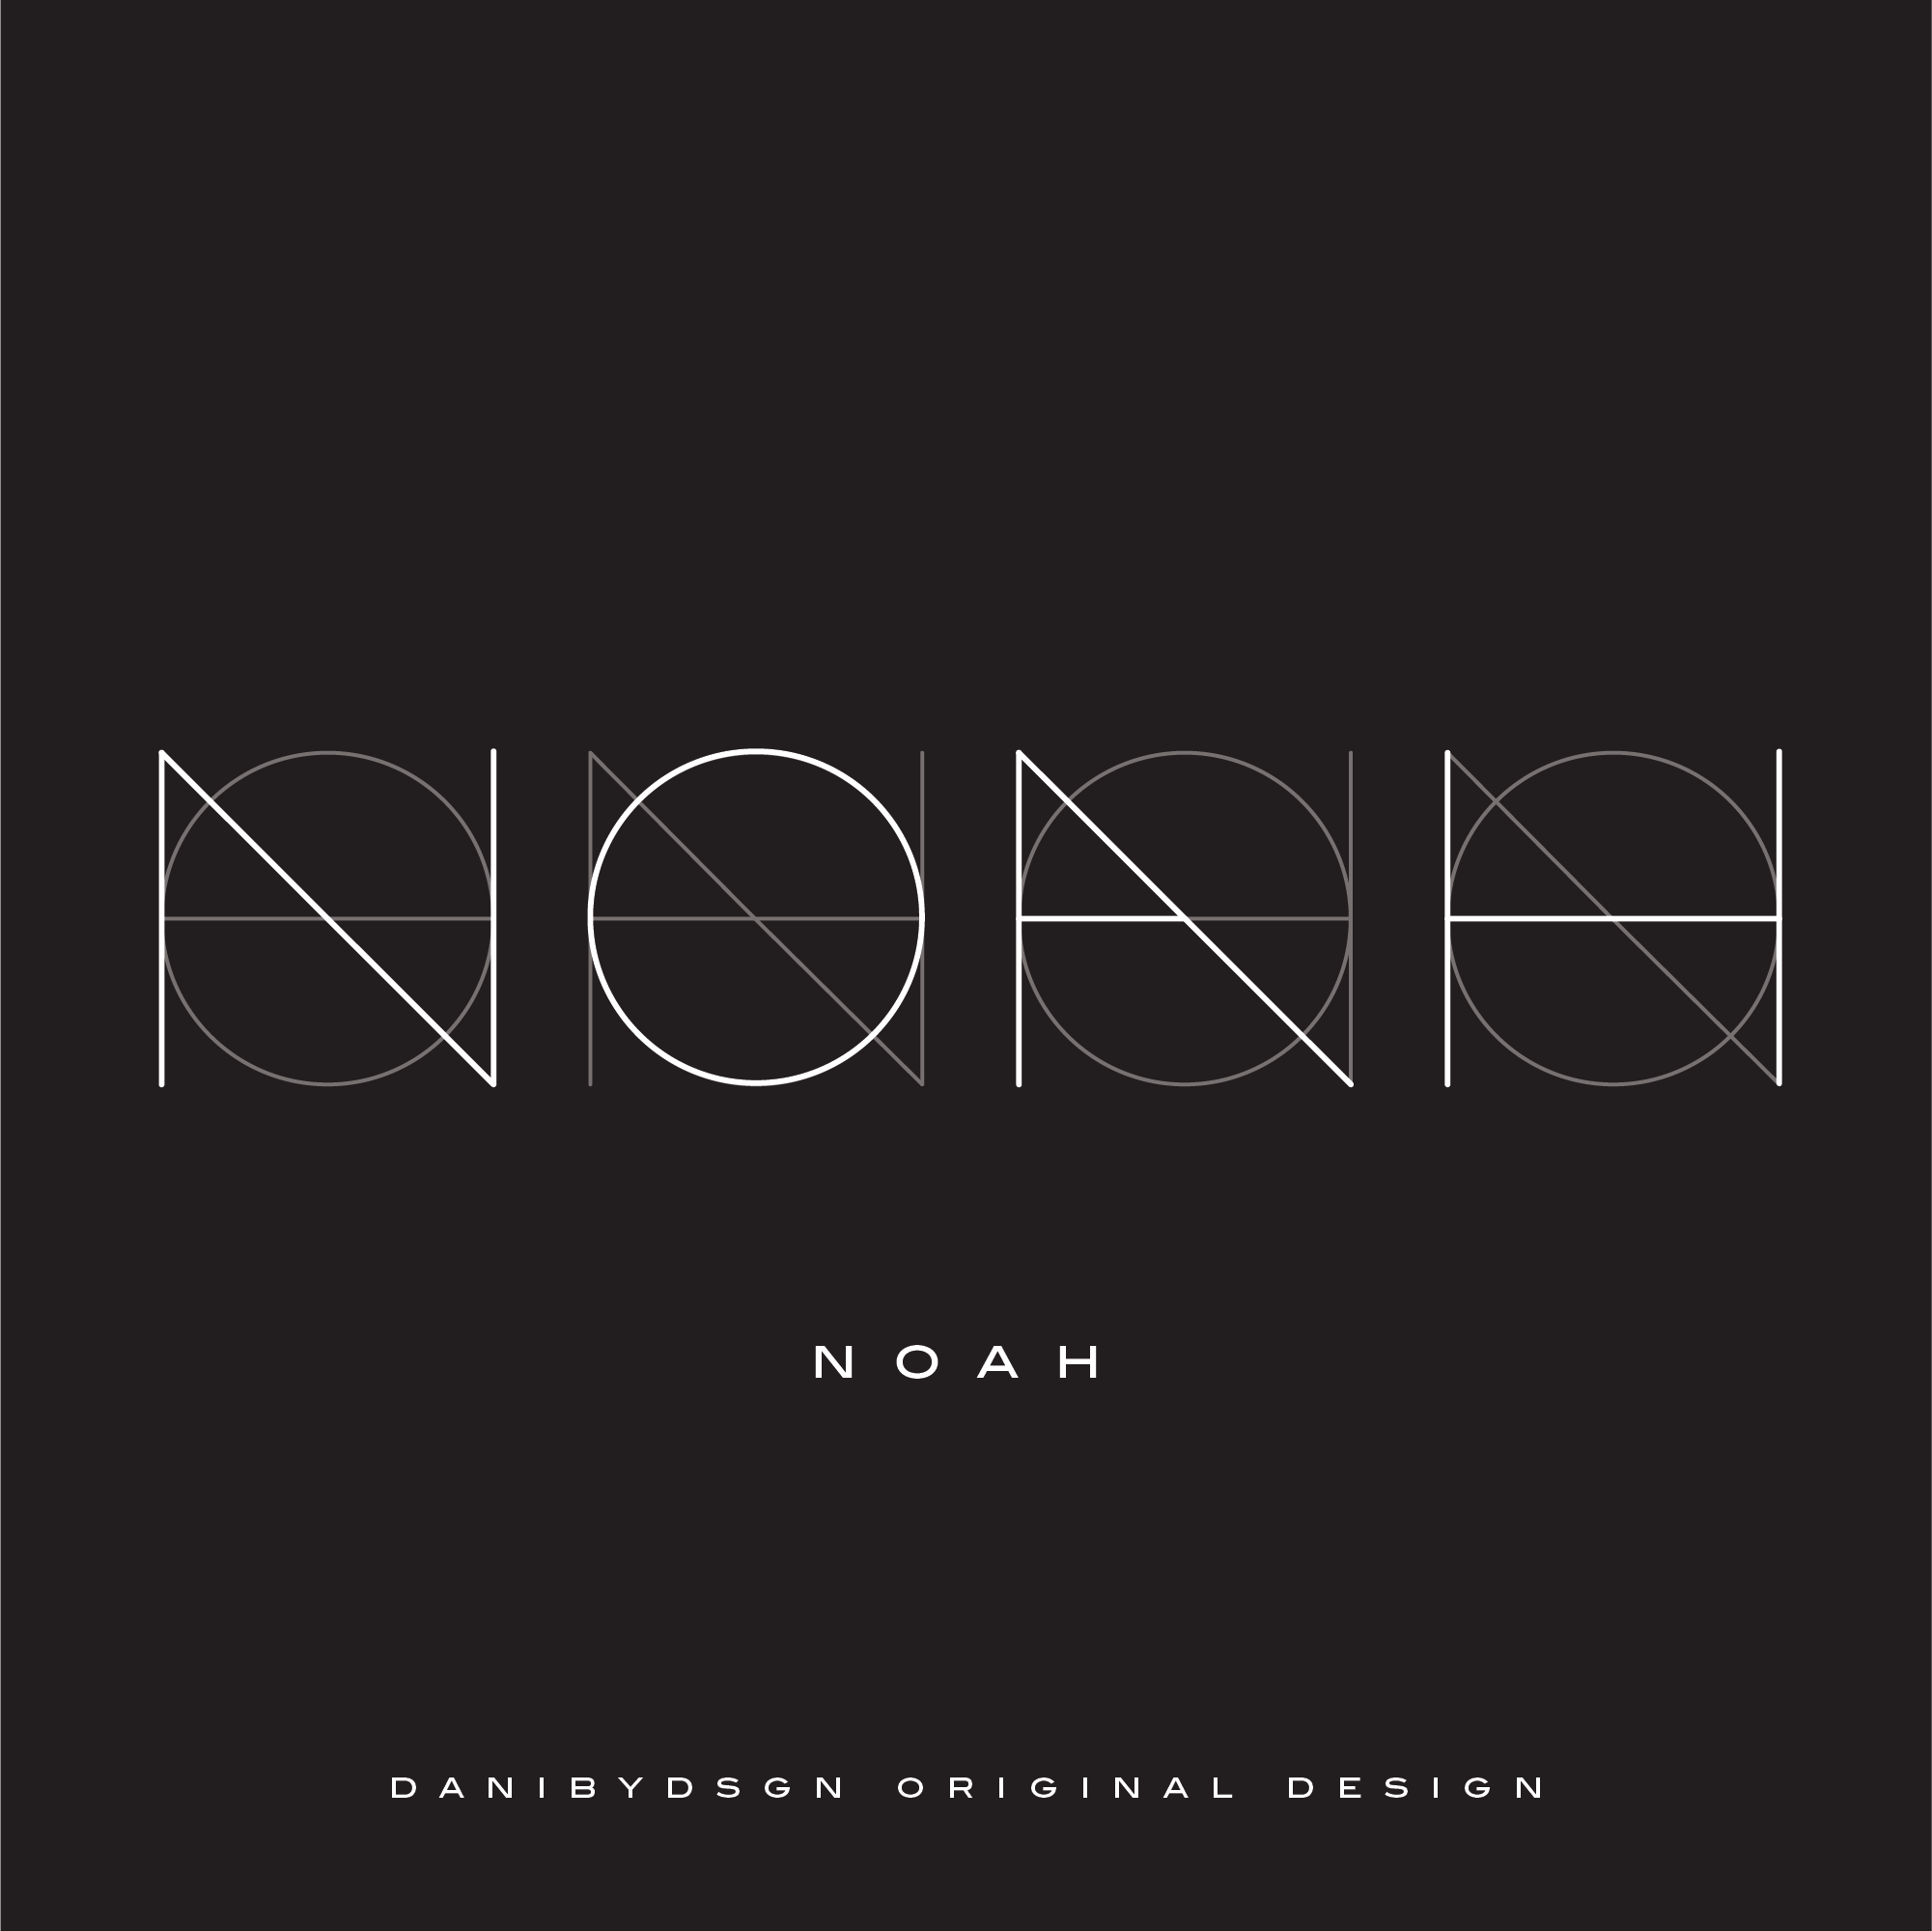 A contemporary 'NOAH' name logo design by Danibydsgn, showcasing the original name logo designer's skill in creating custom name logos.  With over 30,000 designs completed globally and more than 1,700+ five-star reviews, Danibydsgn has a reputation for excellence in personal branding, fineline tattoos, body art design, wall art, clothing branding and elegant business branding.  Danibydsgn overlapped logo designs exemplify minimalist luxury in custom design.